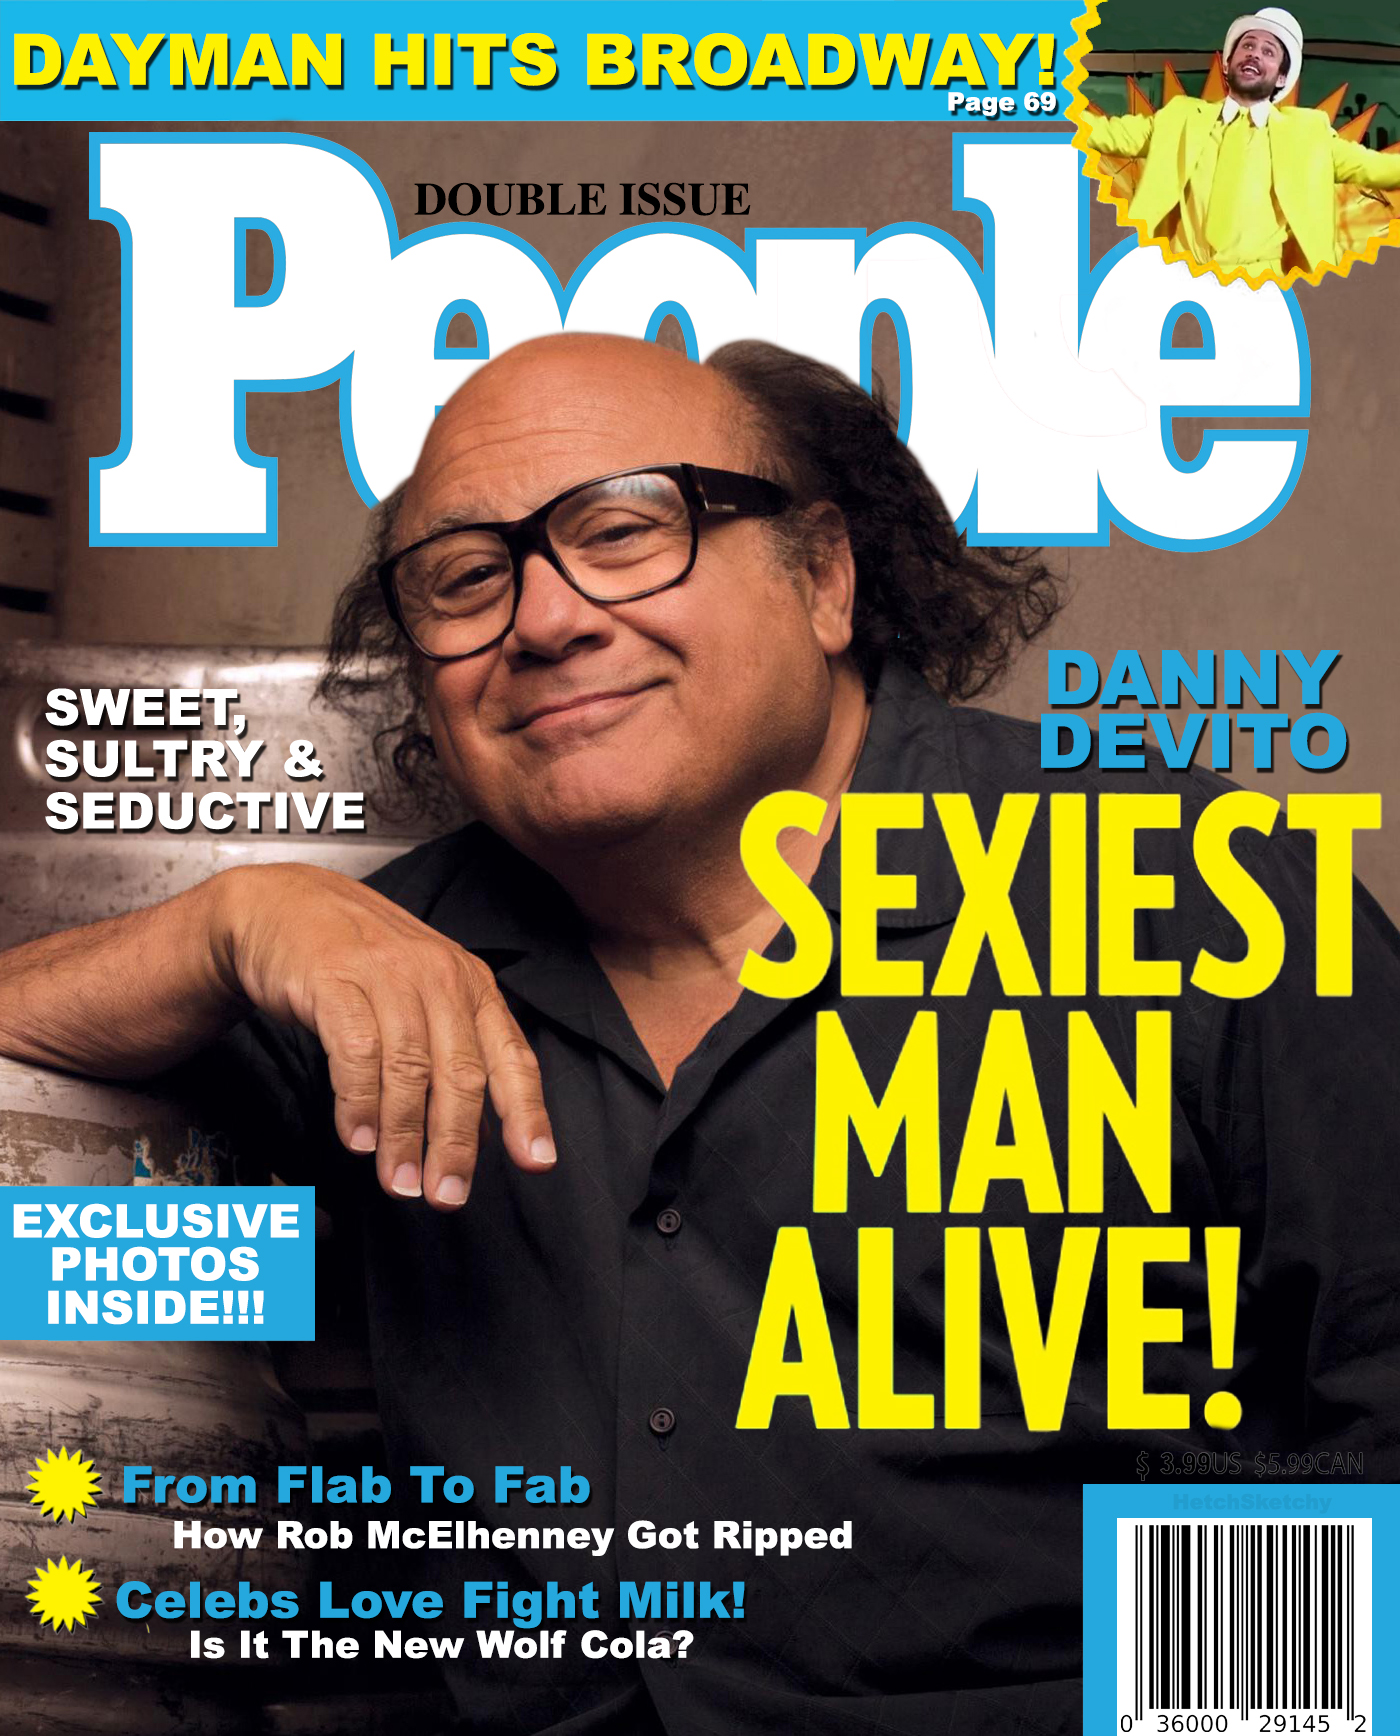 magazine - Dayman Hits Broadway! Double Issue Panne Sweet, Sultry & Seductive Dan Devito Sexiest Man Exclusive Photos Inside!!! Alive! From Flab To Fab How Rob McElhenney Got Ripped Celebs Love Fight Milk! Is It The New Wolf Cola? 03600029145